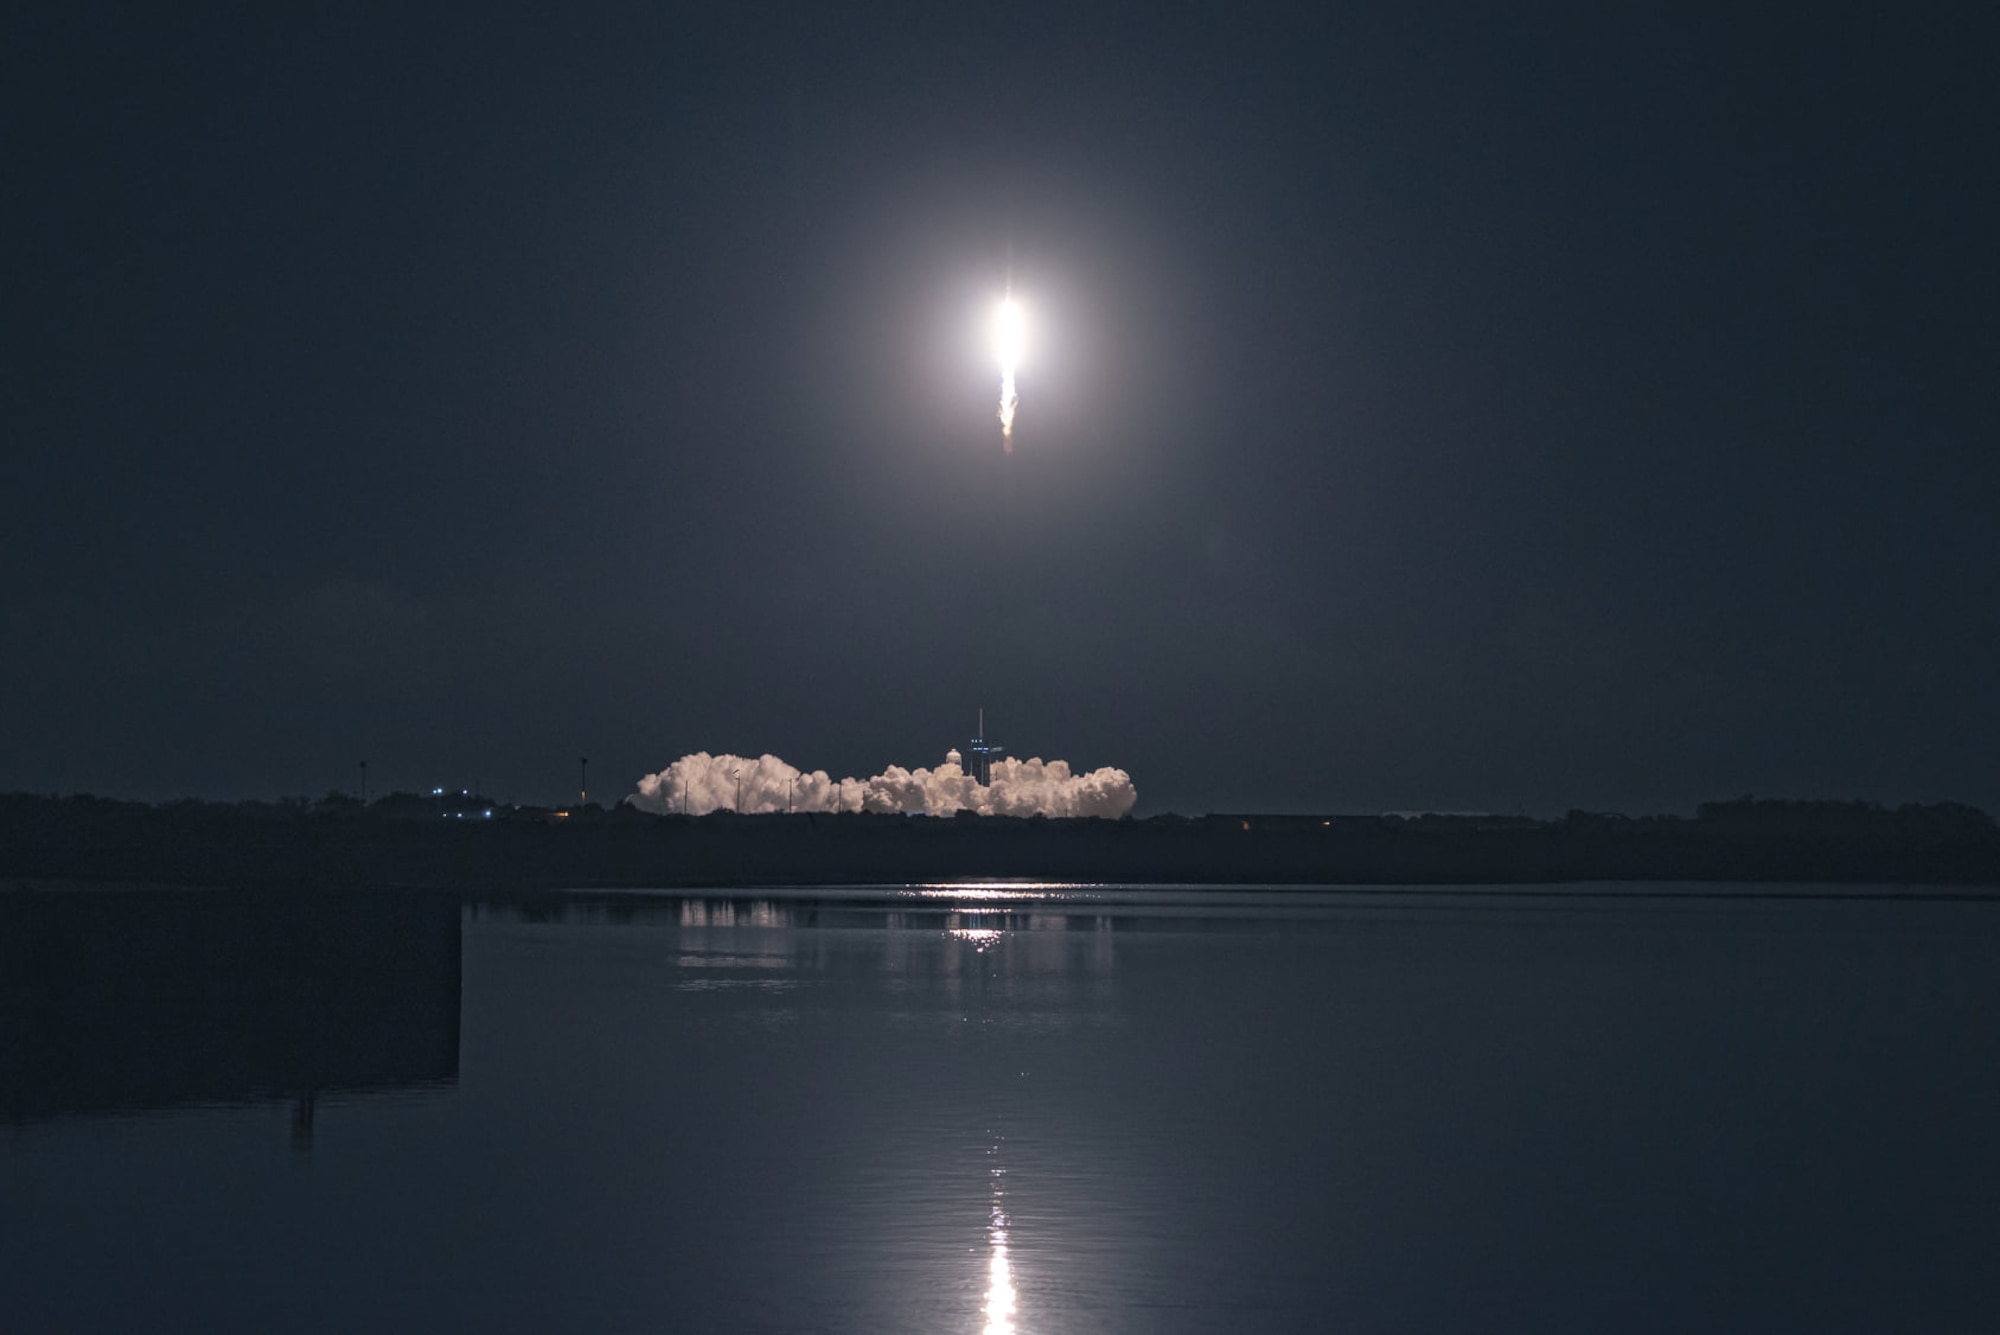 A SpaceX Falcon 9 rocket carrying the company's Crew Dragon spacecraft is launched on NASA's SpaceX Crew-1 mission to the International Space Station Nov. 15, 2020, at NASA's Kennedy Space Center in Florida.